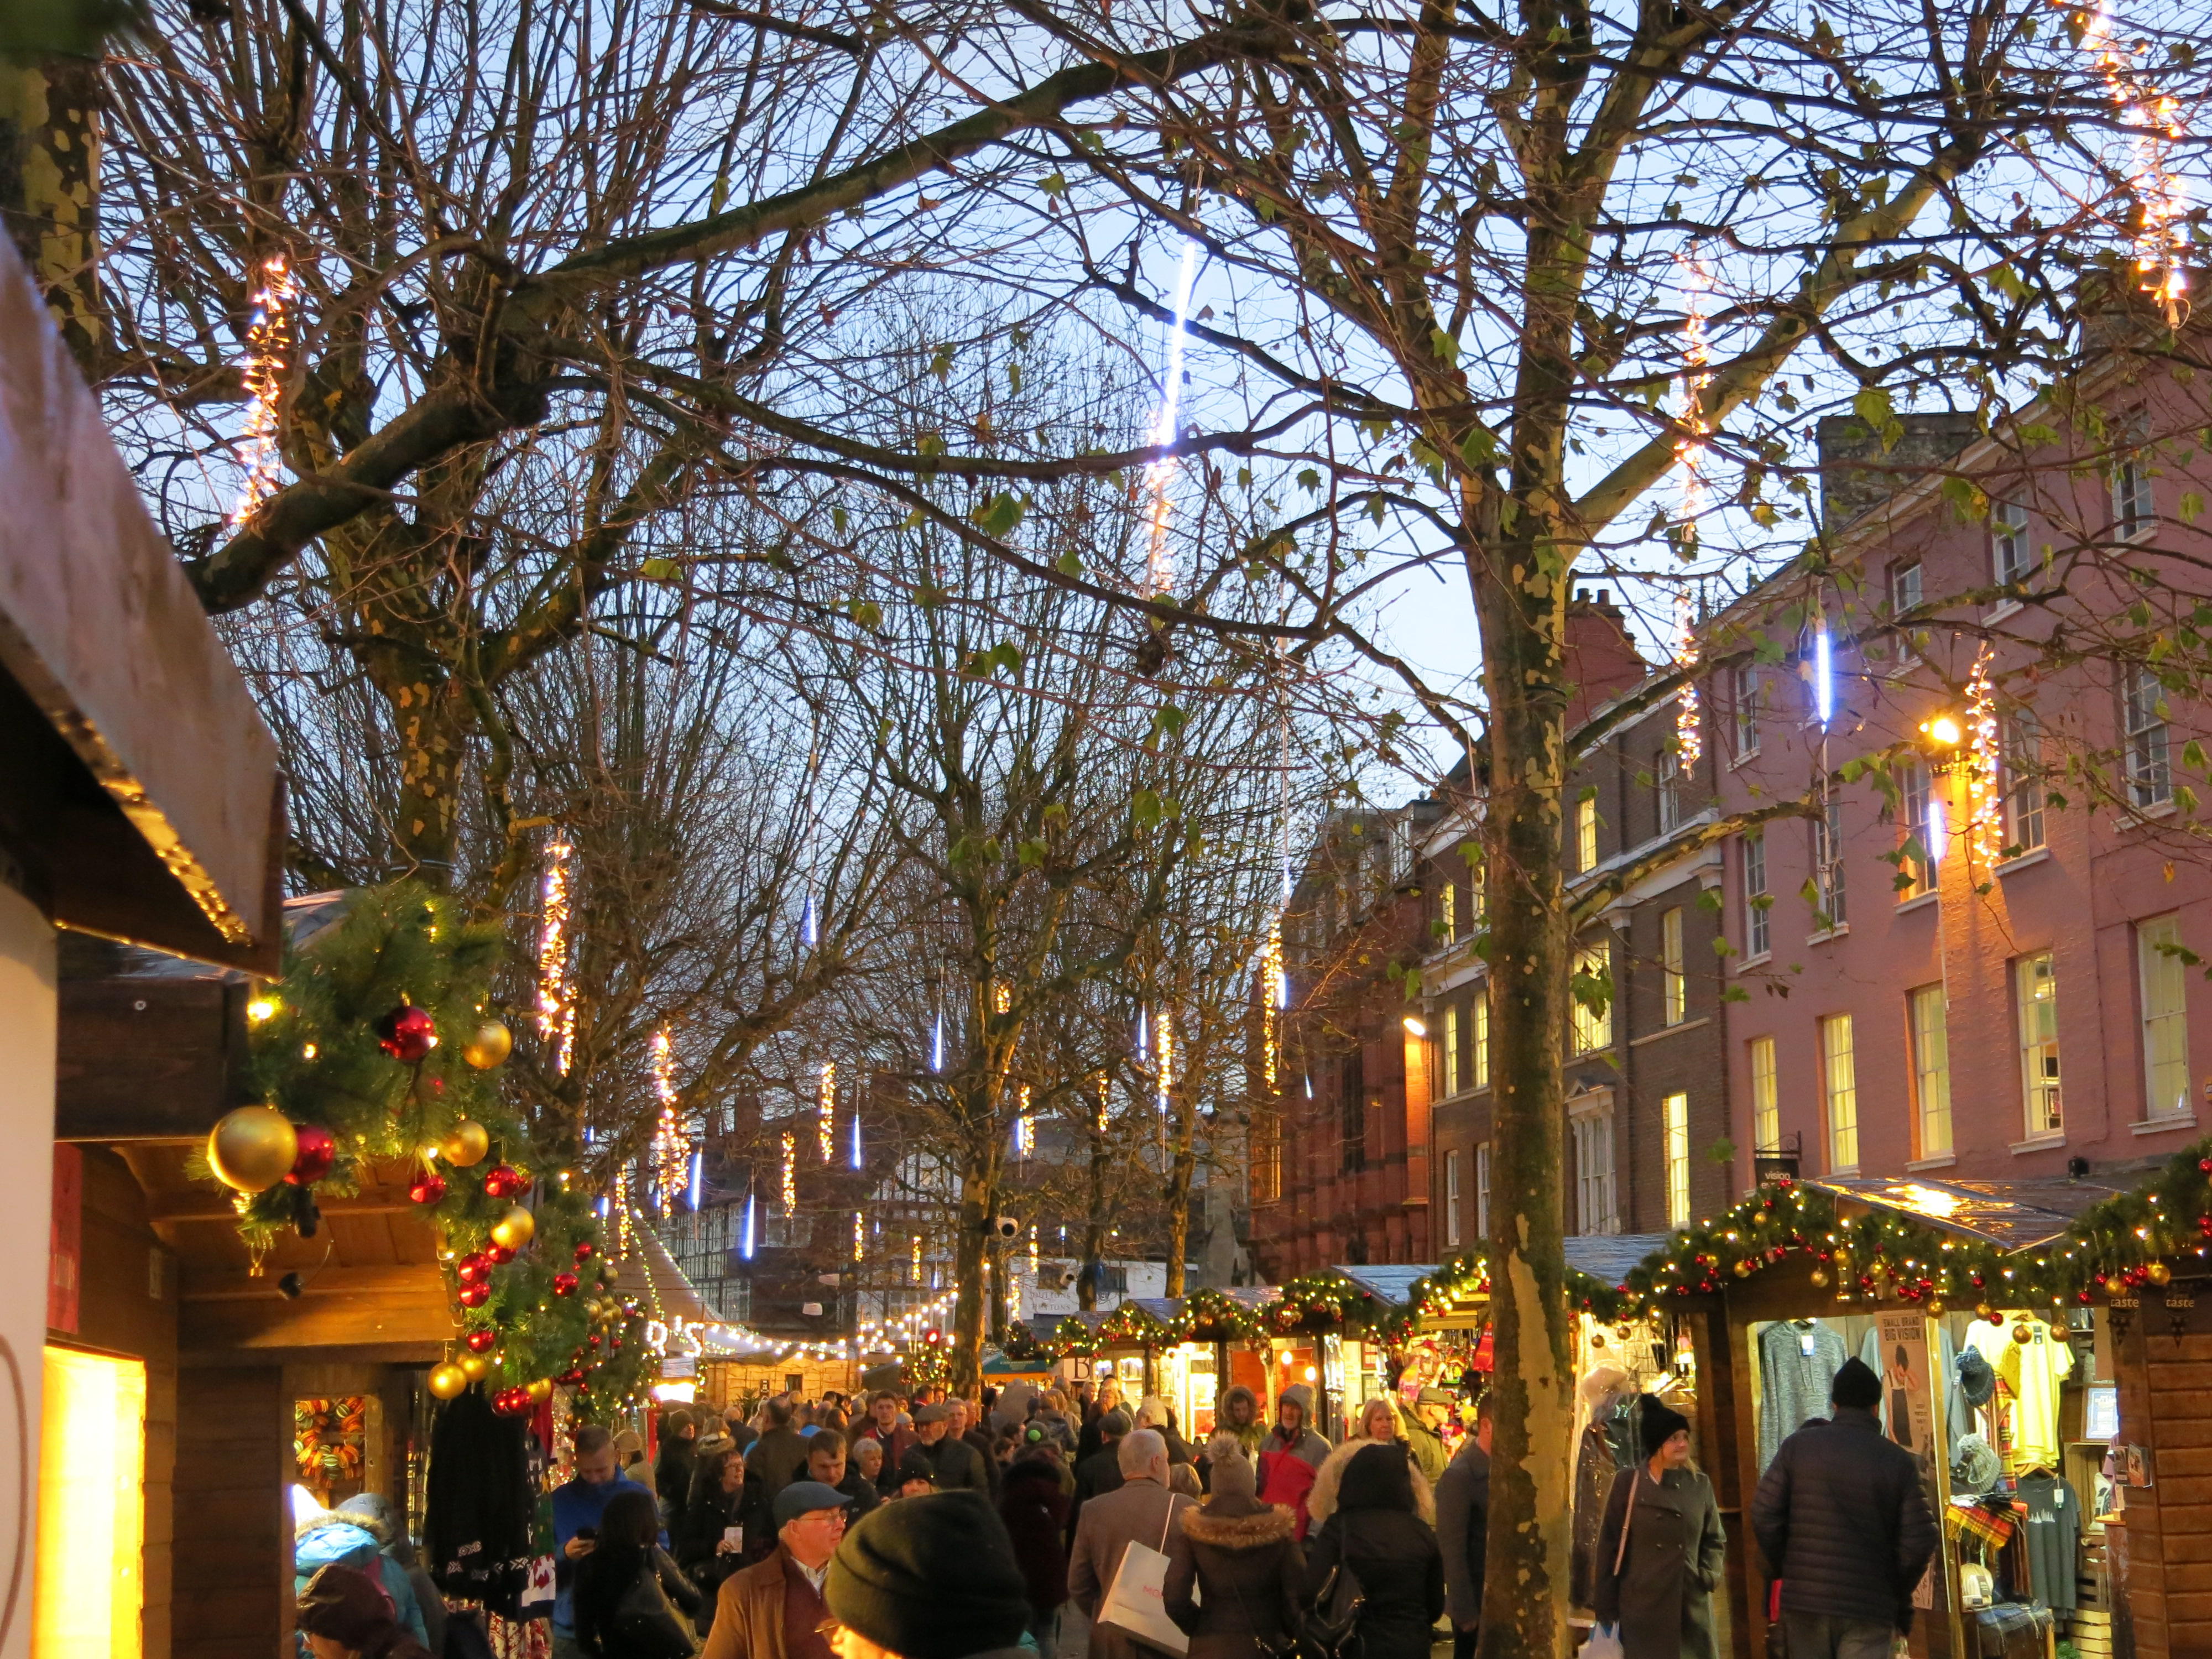 8 of the prettiest Christmas markets in York for 2022